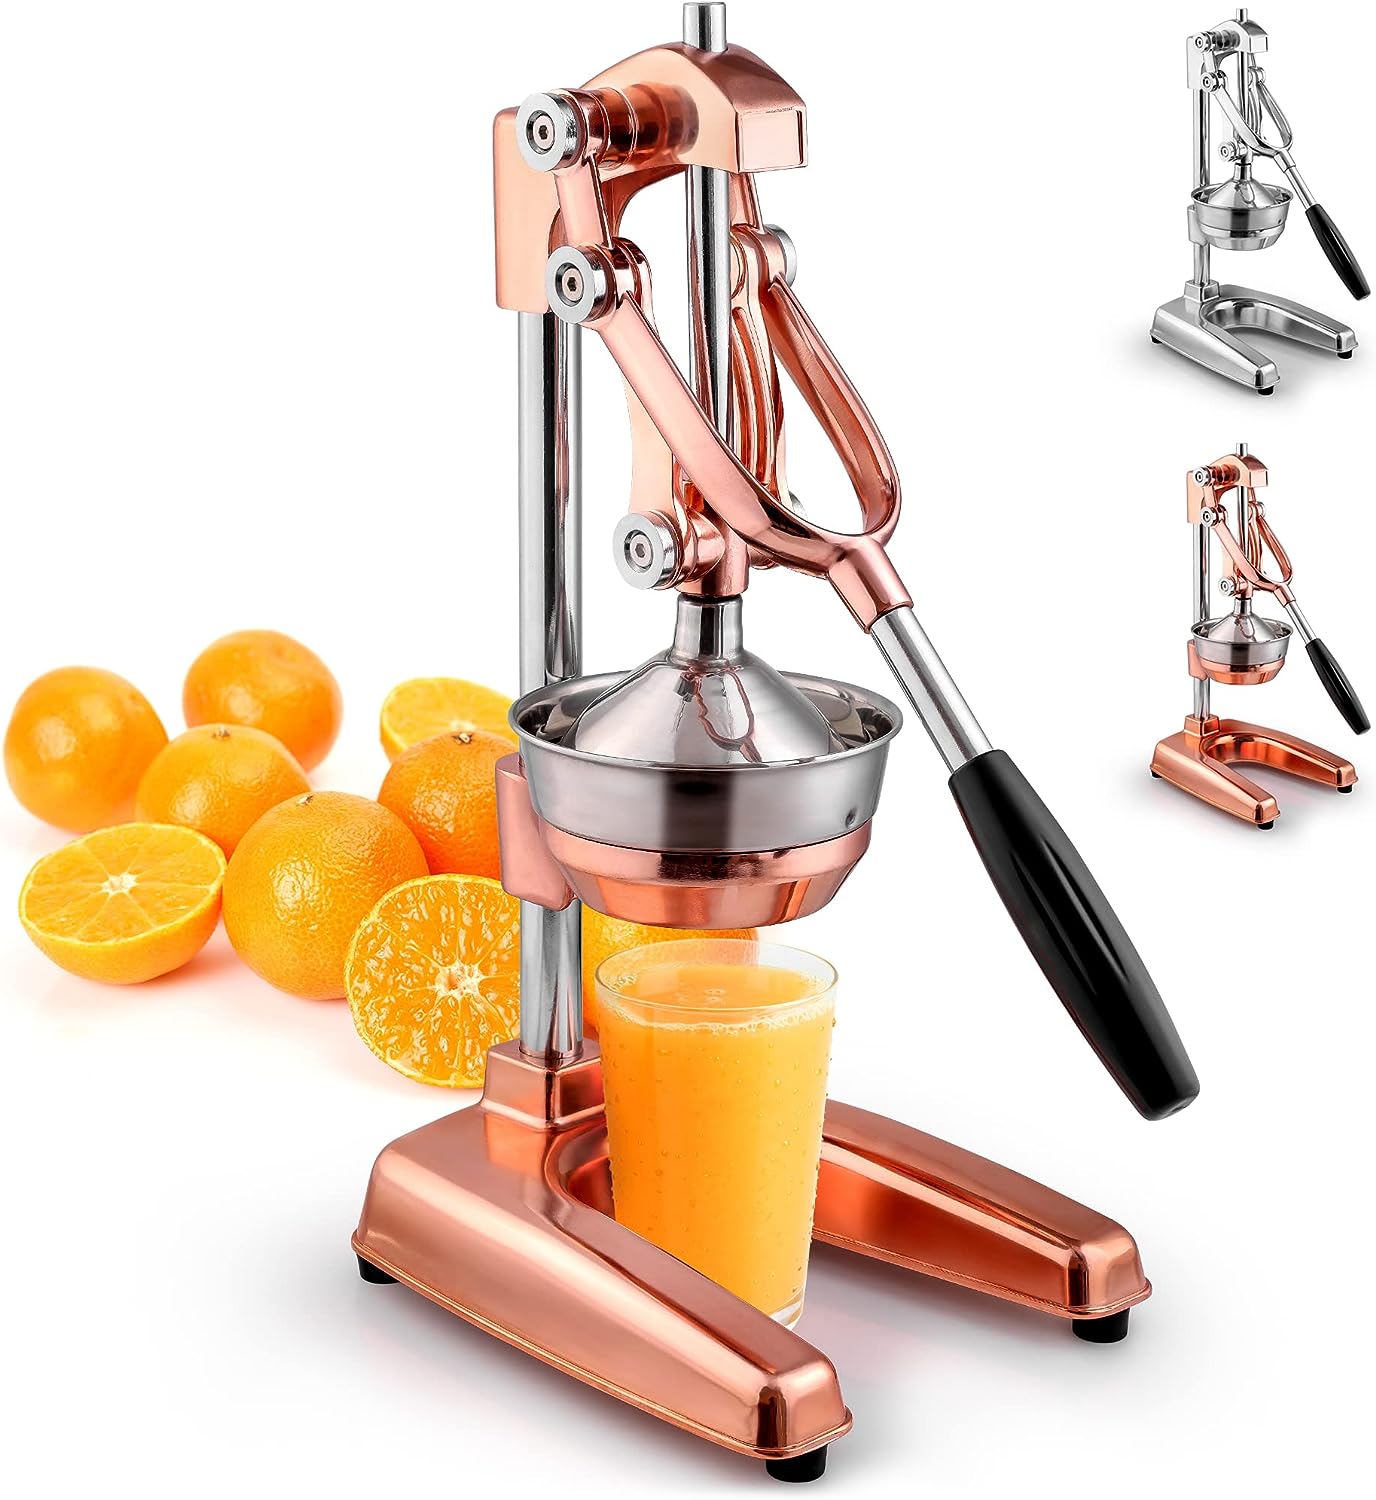 Extra Tall Professional Manual Citrus Press by Zulay Kitchen